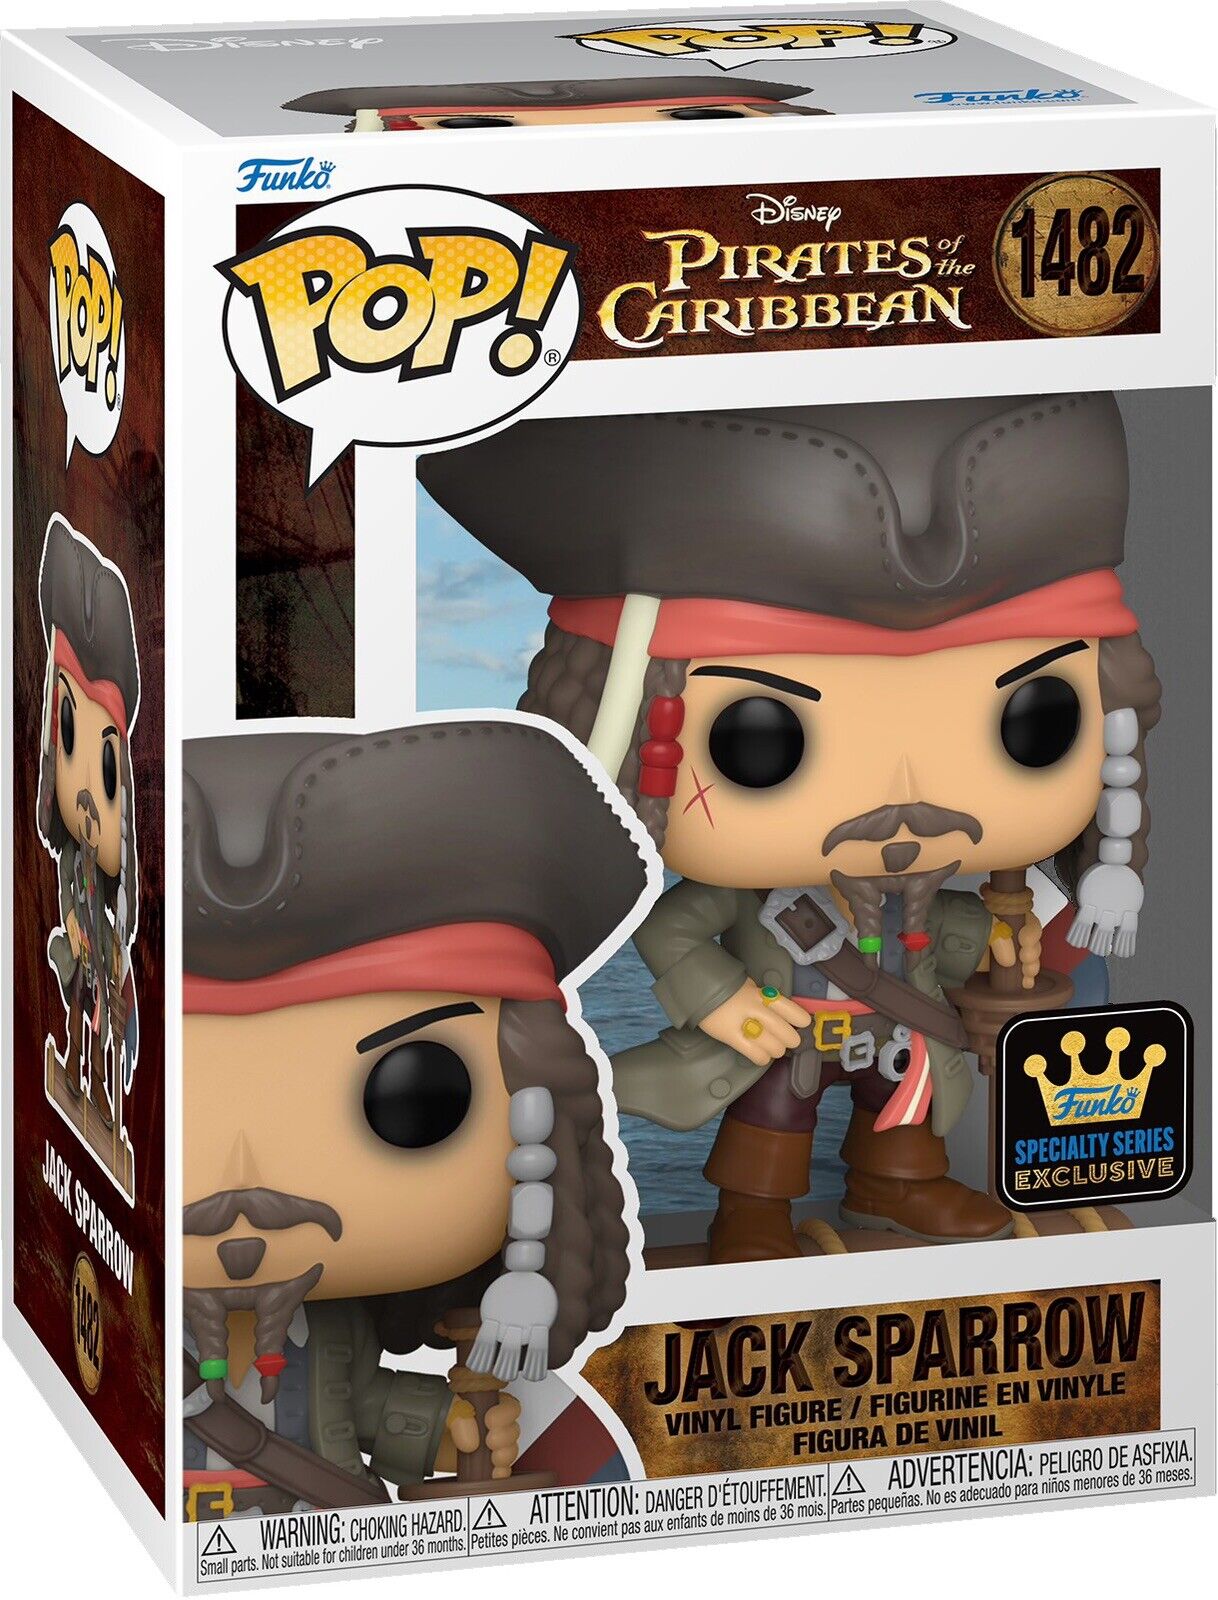 Pirates of the Caribbean Jack Sparrow Funko Pop #1482  Speciality SeriesPresell